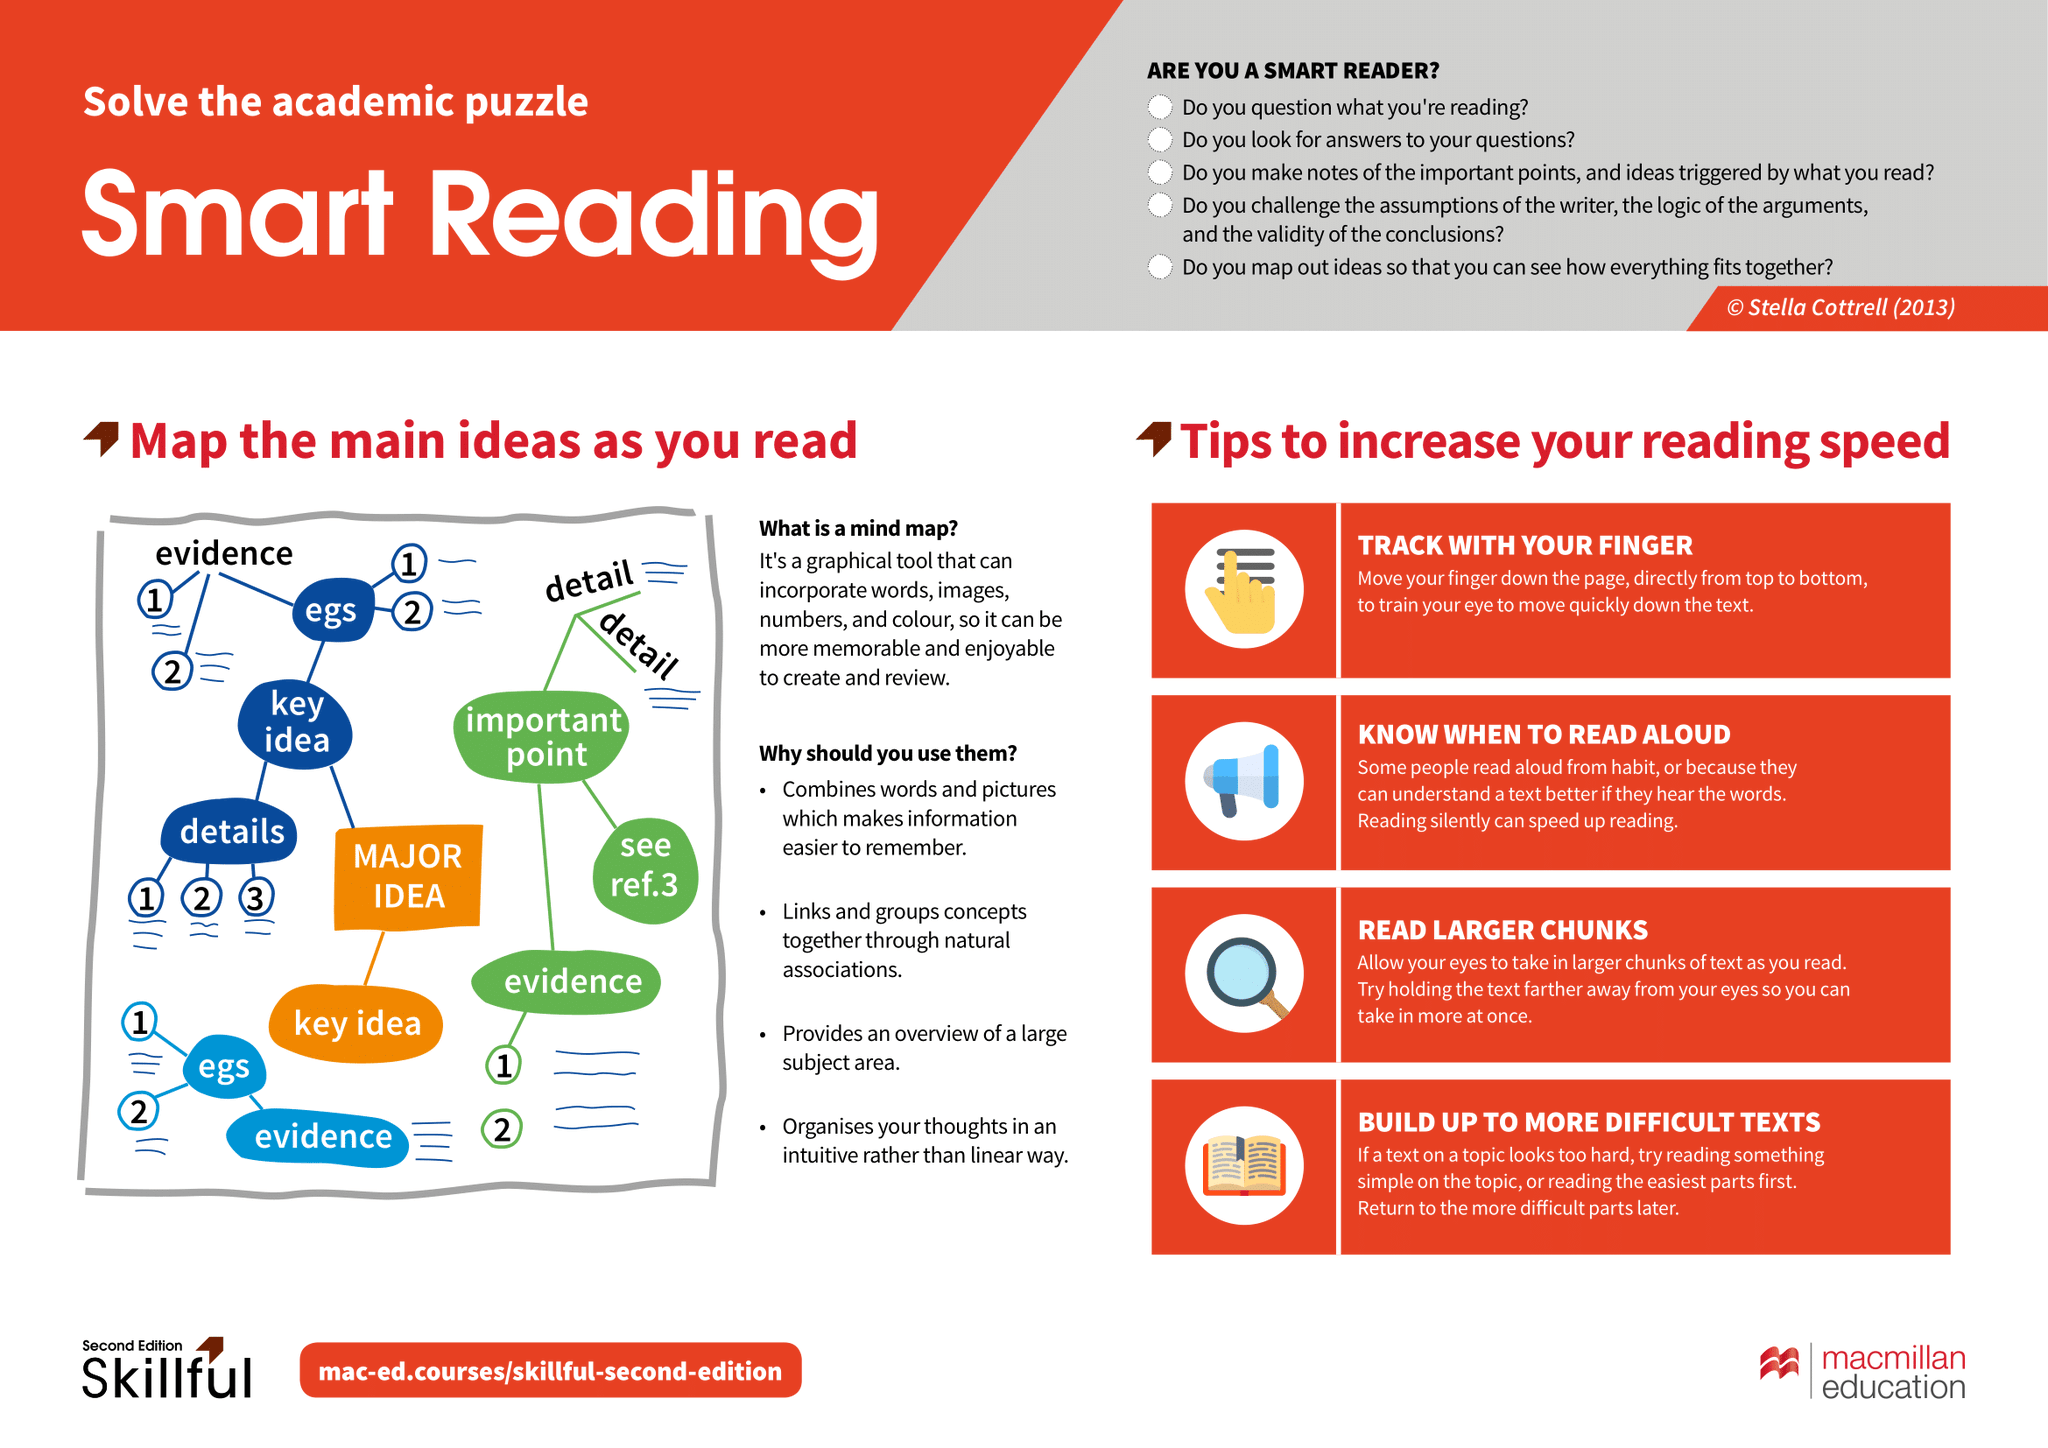 How to Be a Smart Reader - Infographic